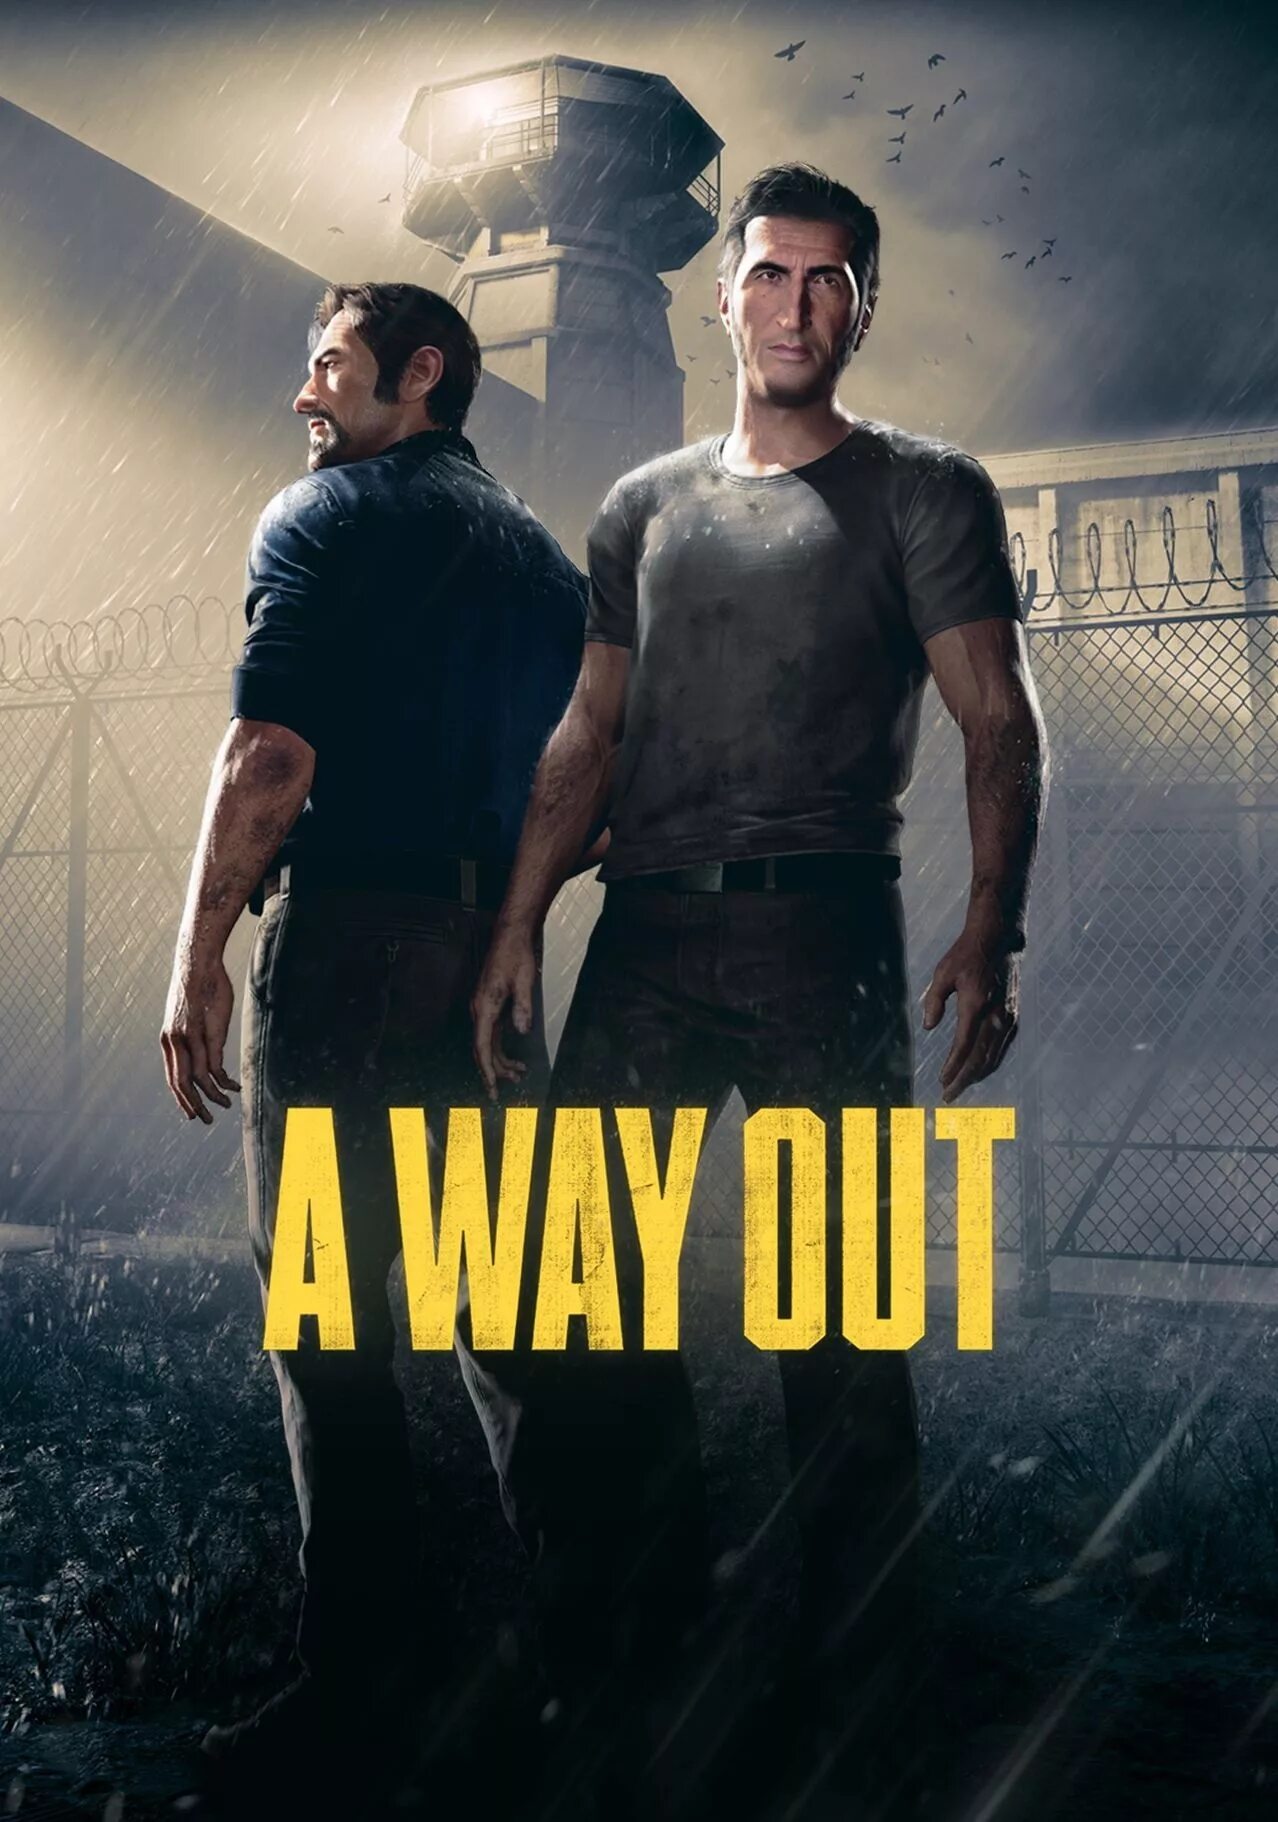 A way out game. Way out игра. A way out ps4. A way out обложка игры. A way out (Xbox one).